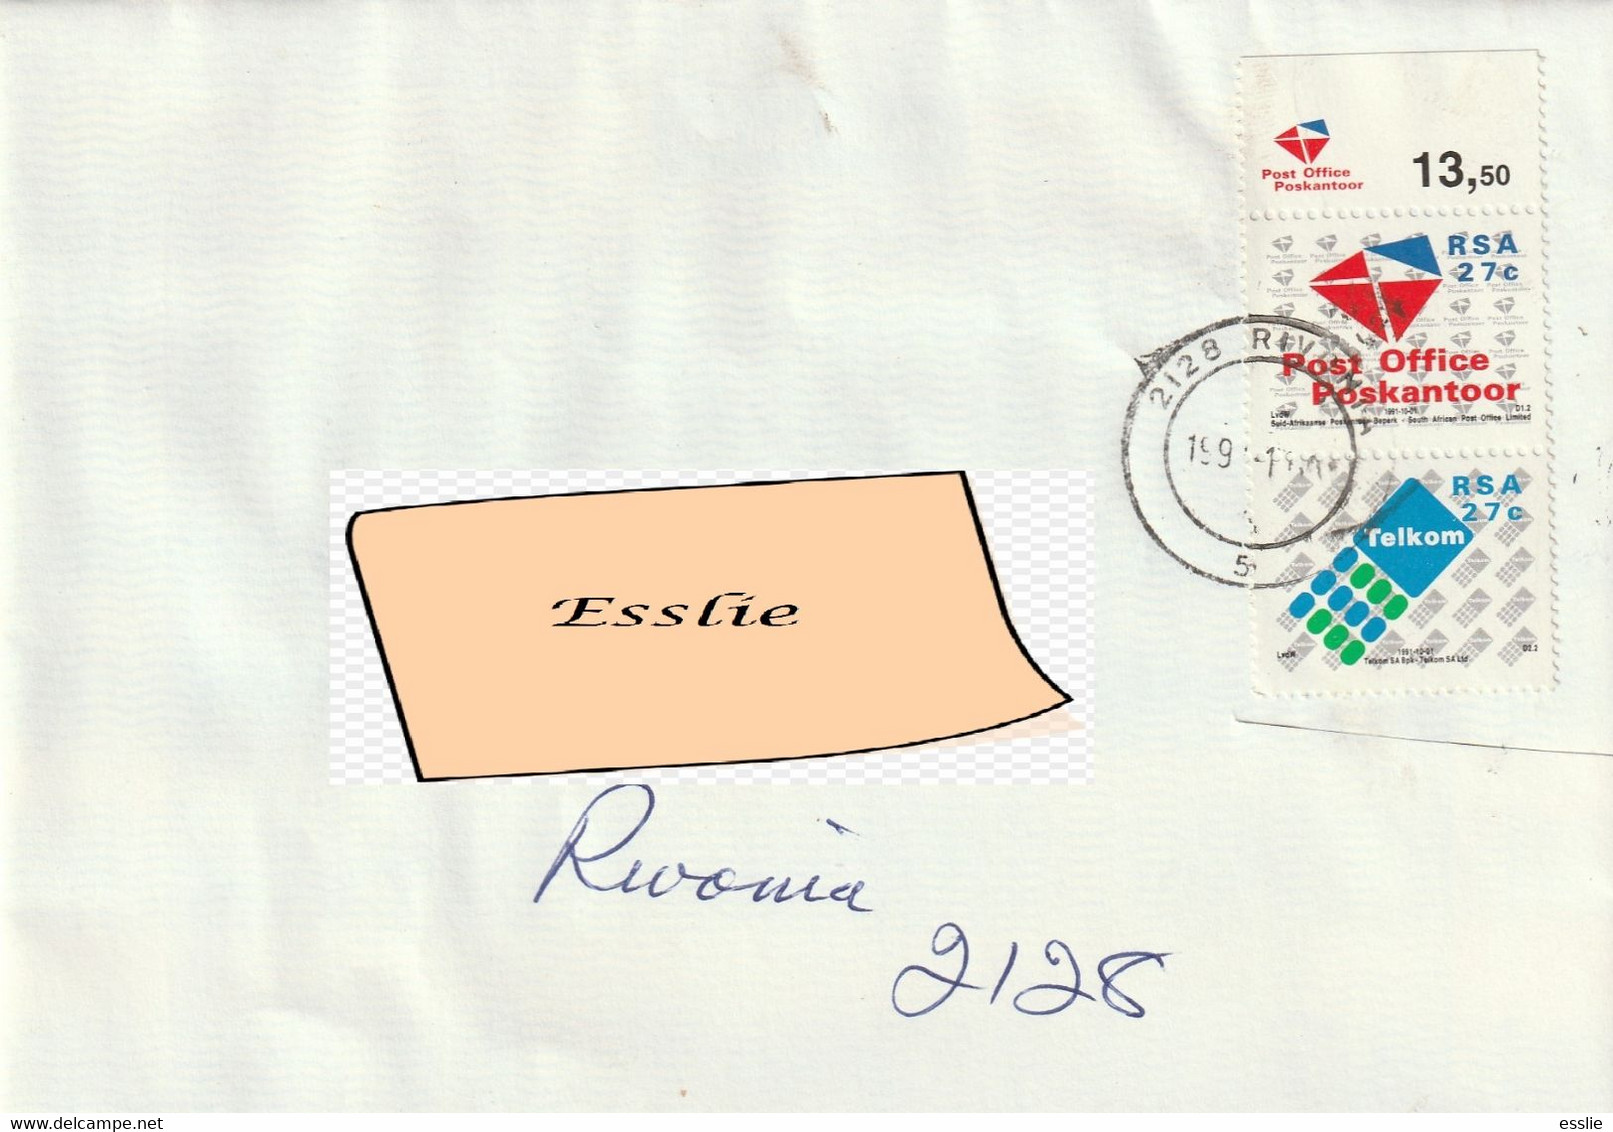 South Africa RSA - 1991 - Creation Of Post Office And Telkom Limited Cover - Covers & Documents